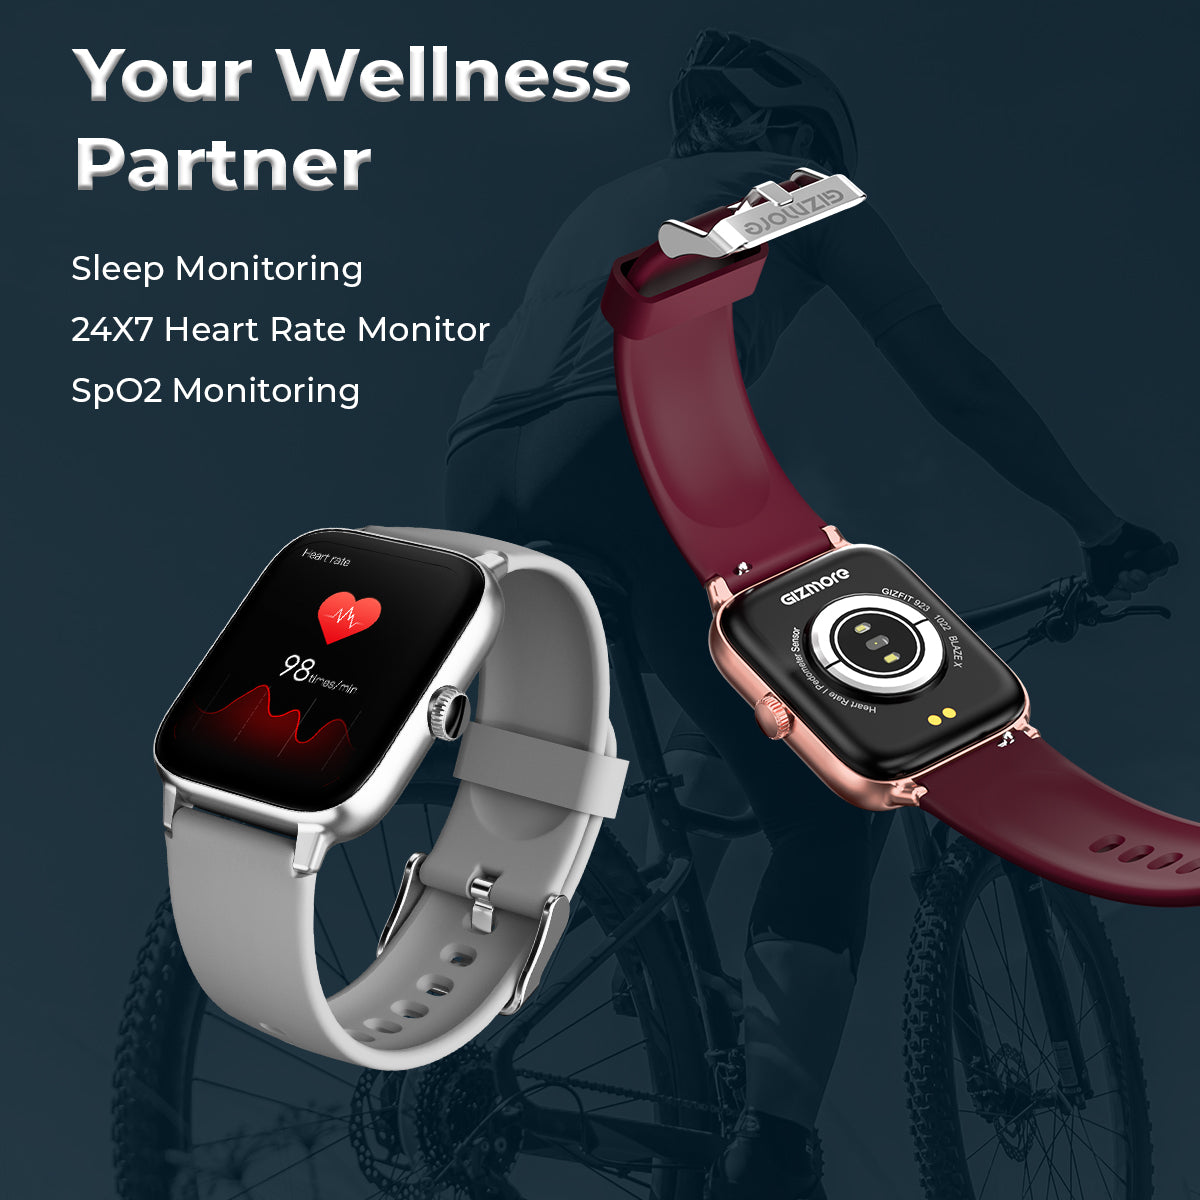 GIZMORE Blaze X Smartwatch Bluetooth Calling 1.85" HD Display, 600 NITS, 240 * 286 PX High Res with SpO2, Heart Rate Monitoring, smartwatch for Men and Women